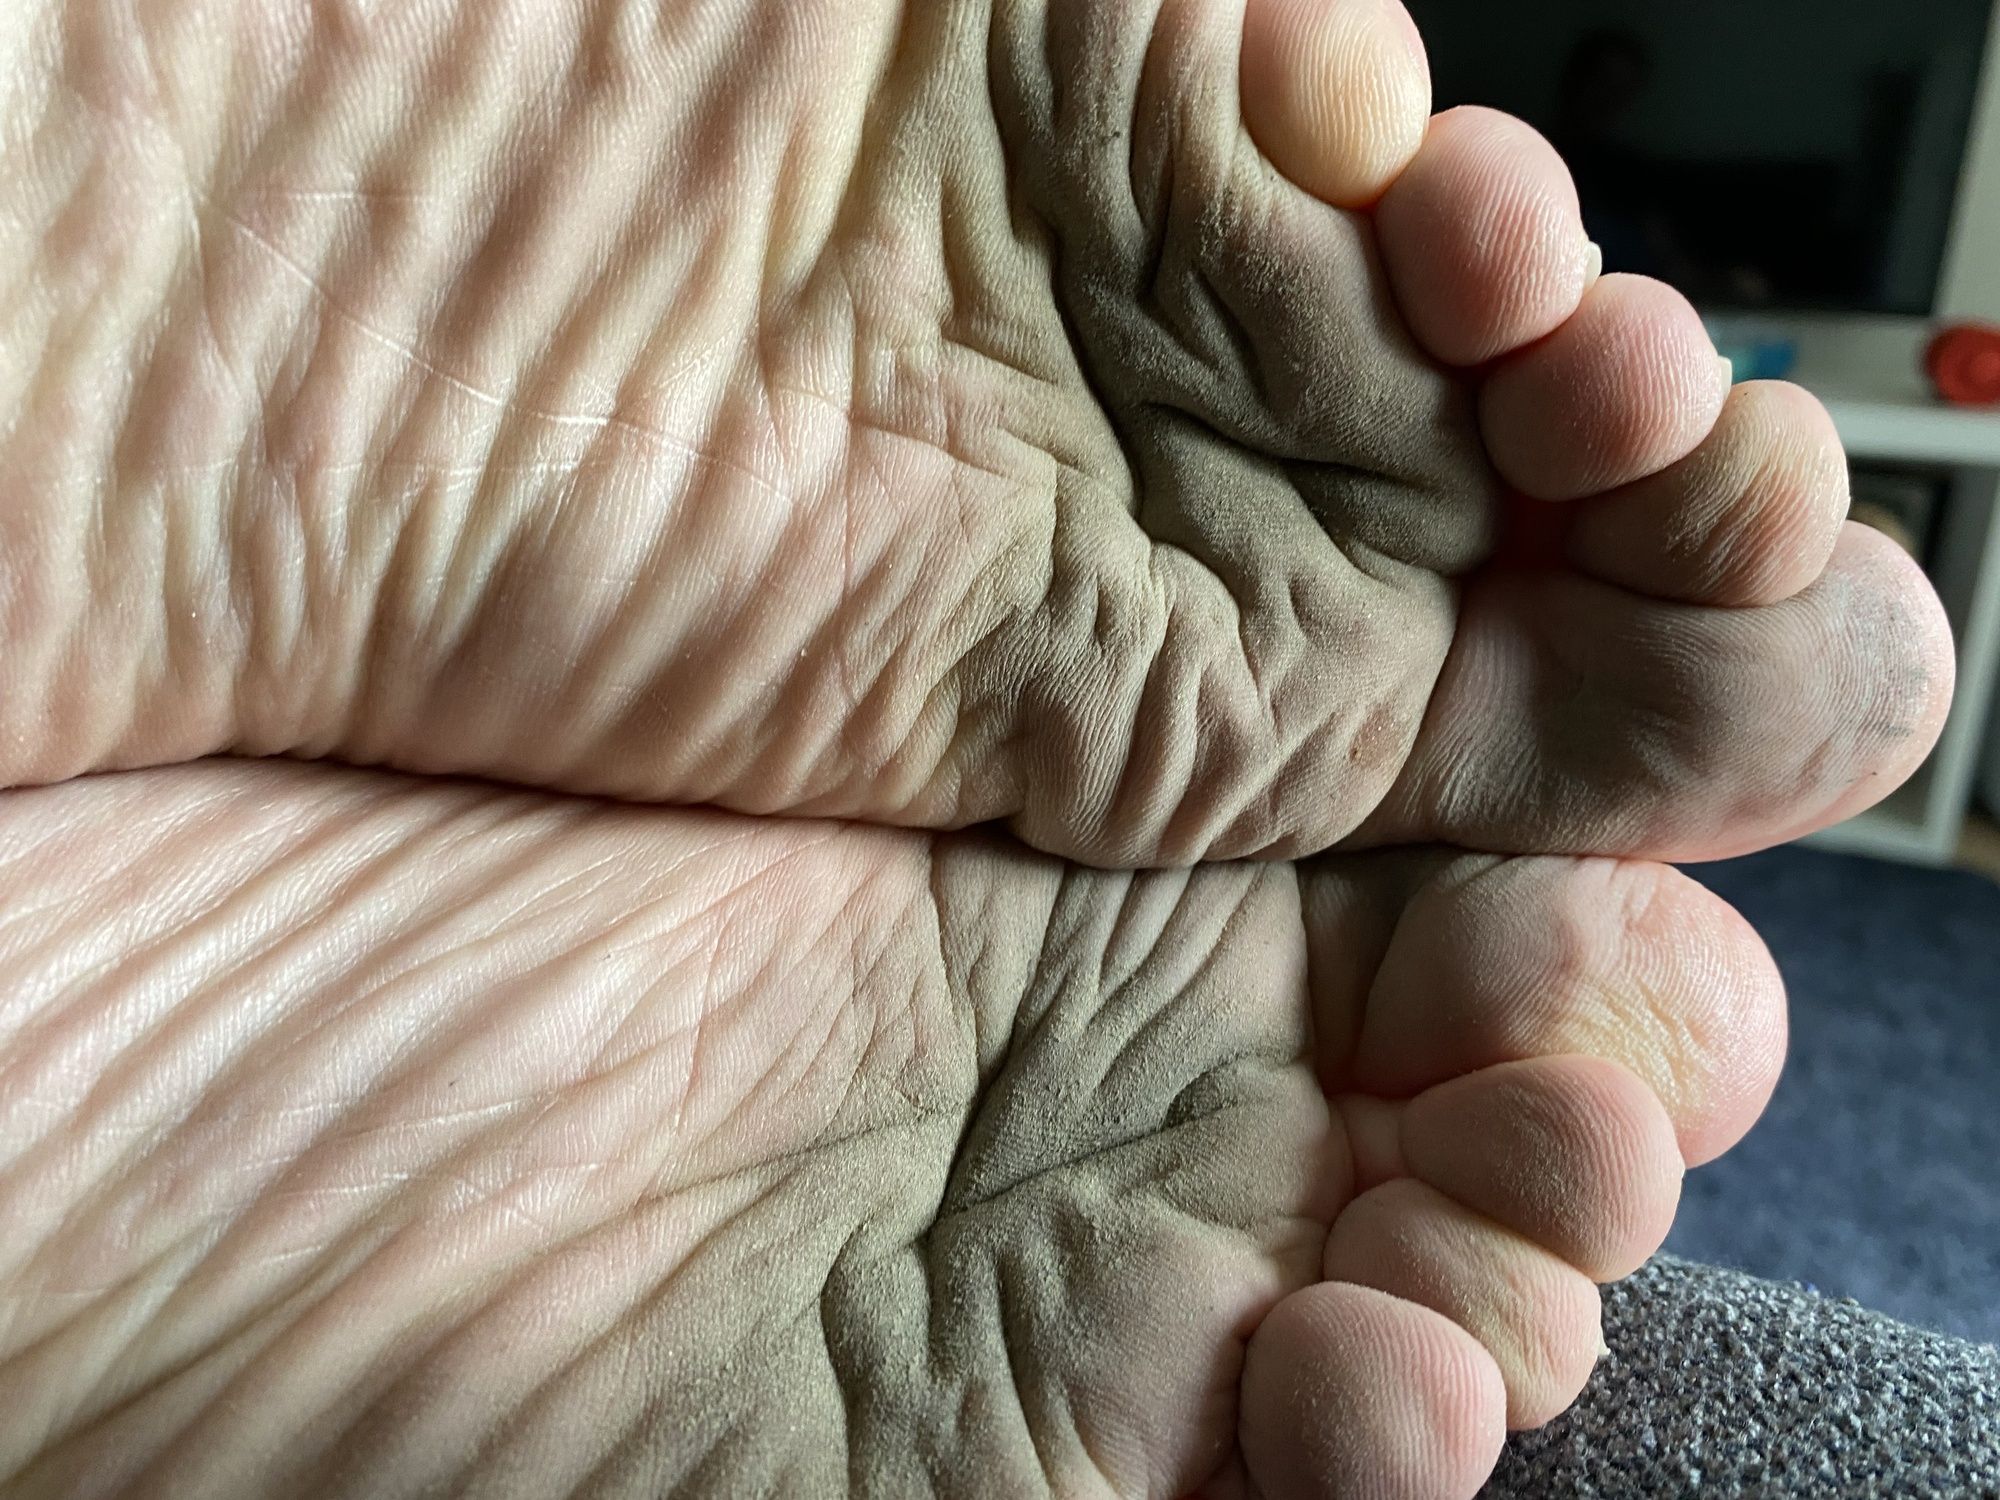 For the love of feet #7